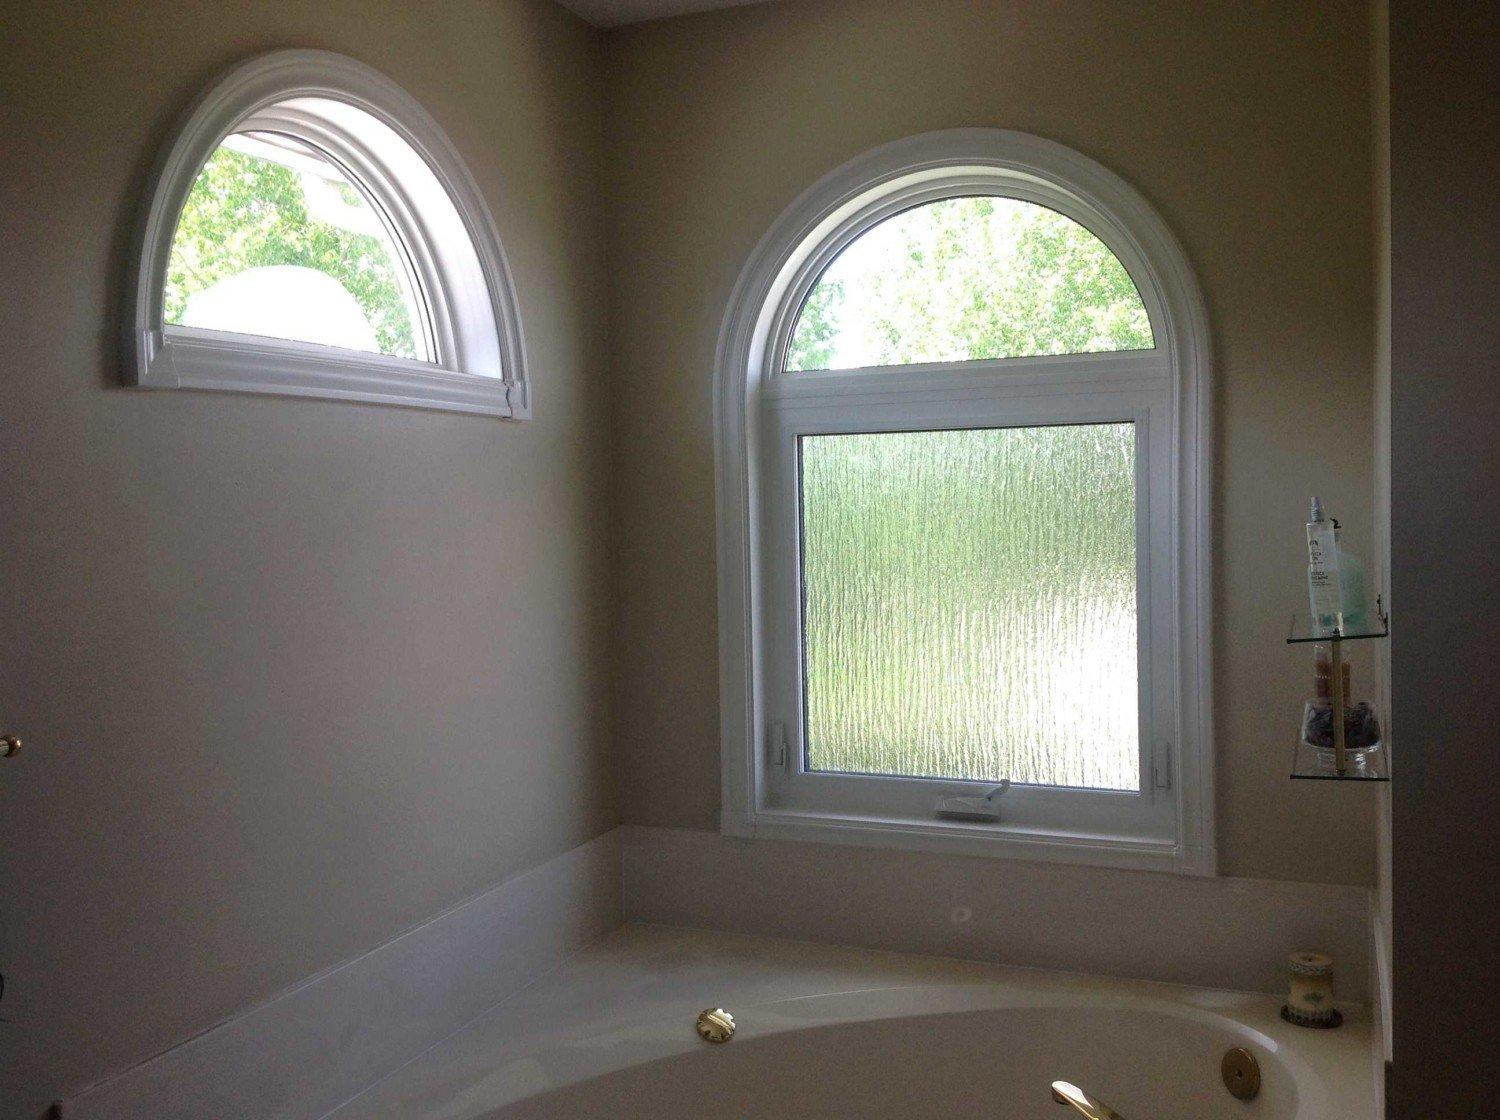 Bathroom Windows What You Should Know